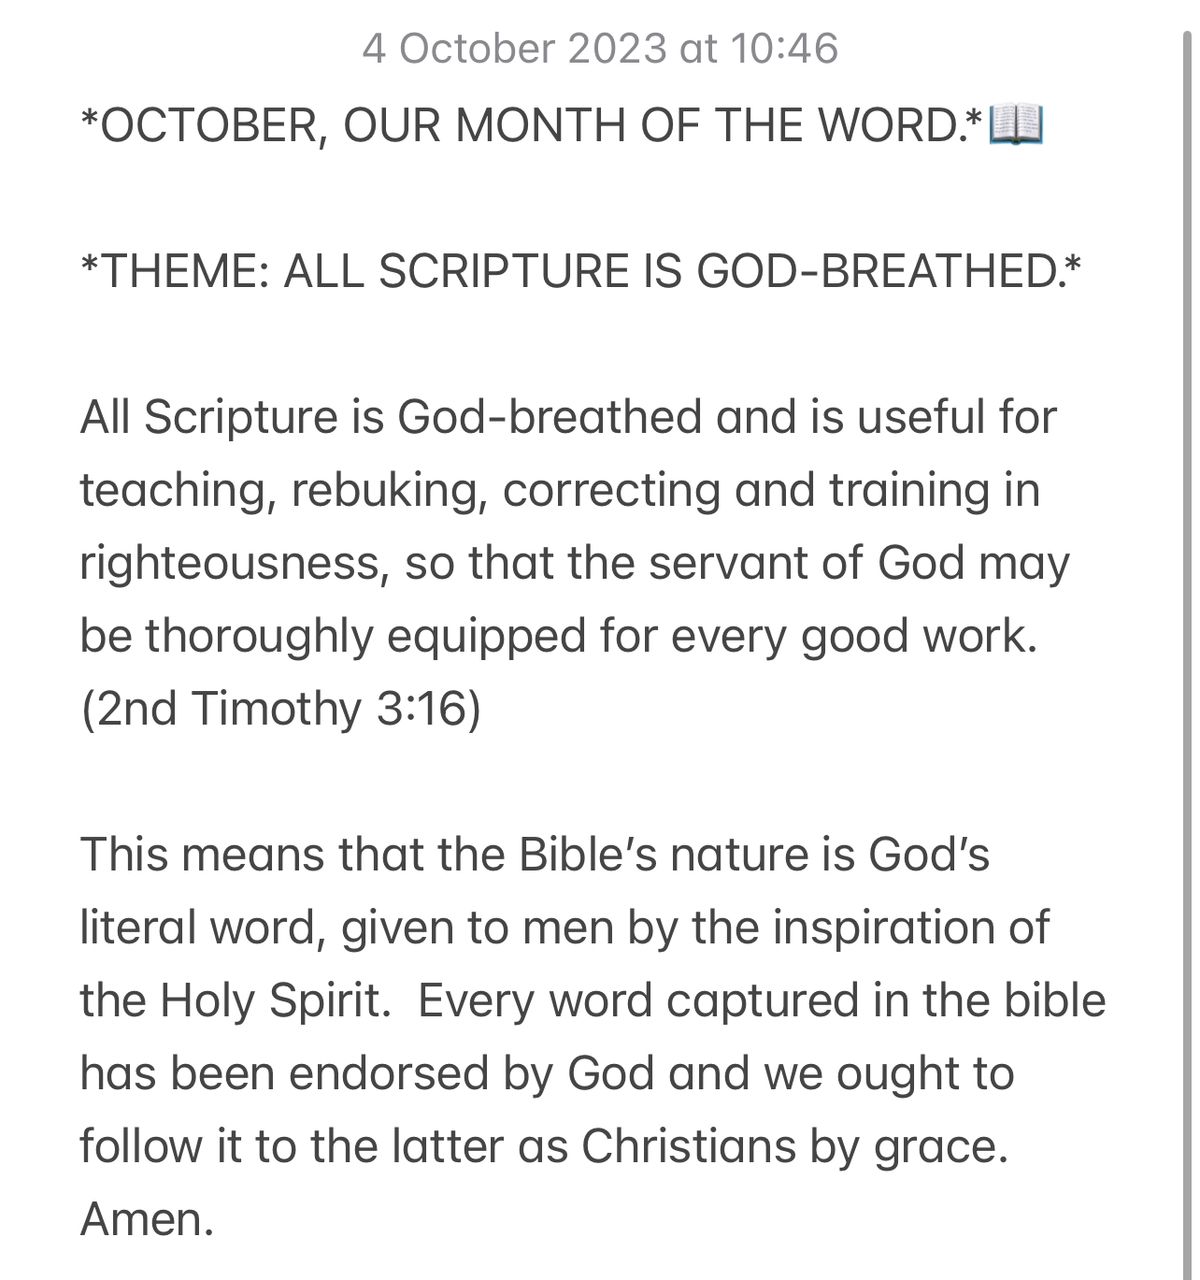 ALL SCRIPTURE IS GOD-BREATHED.